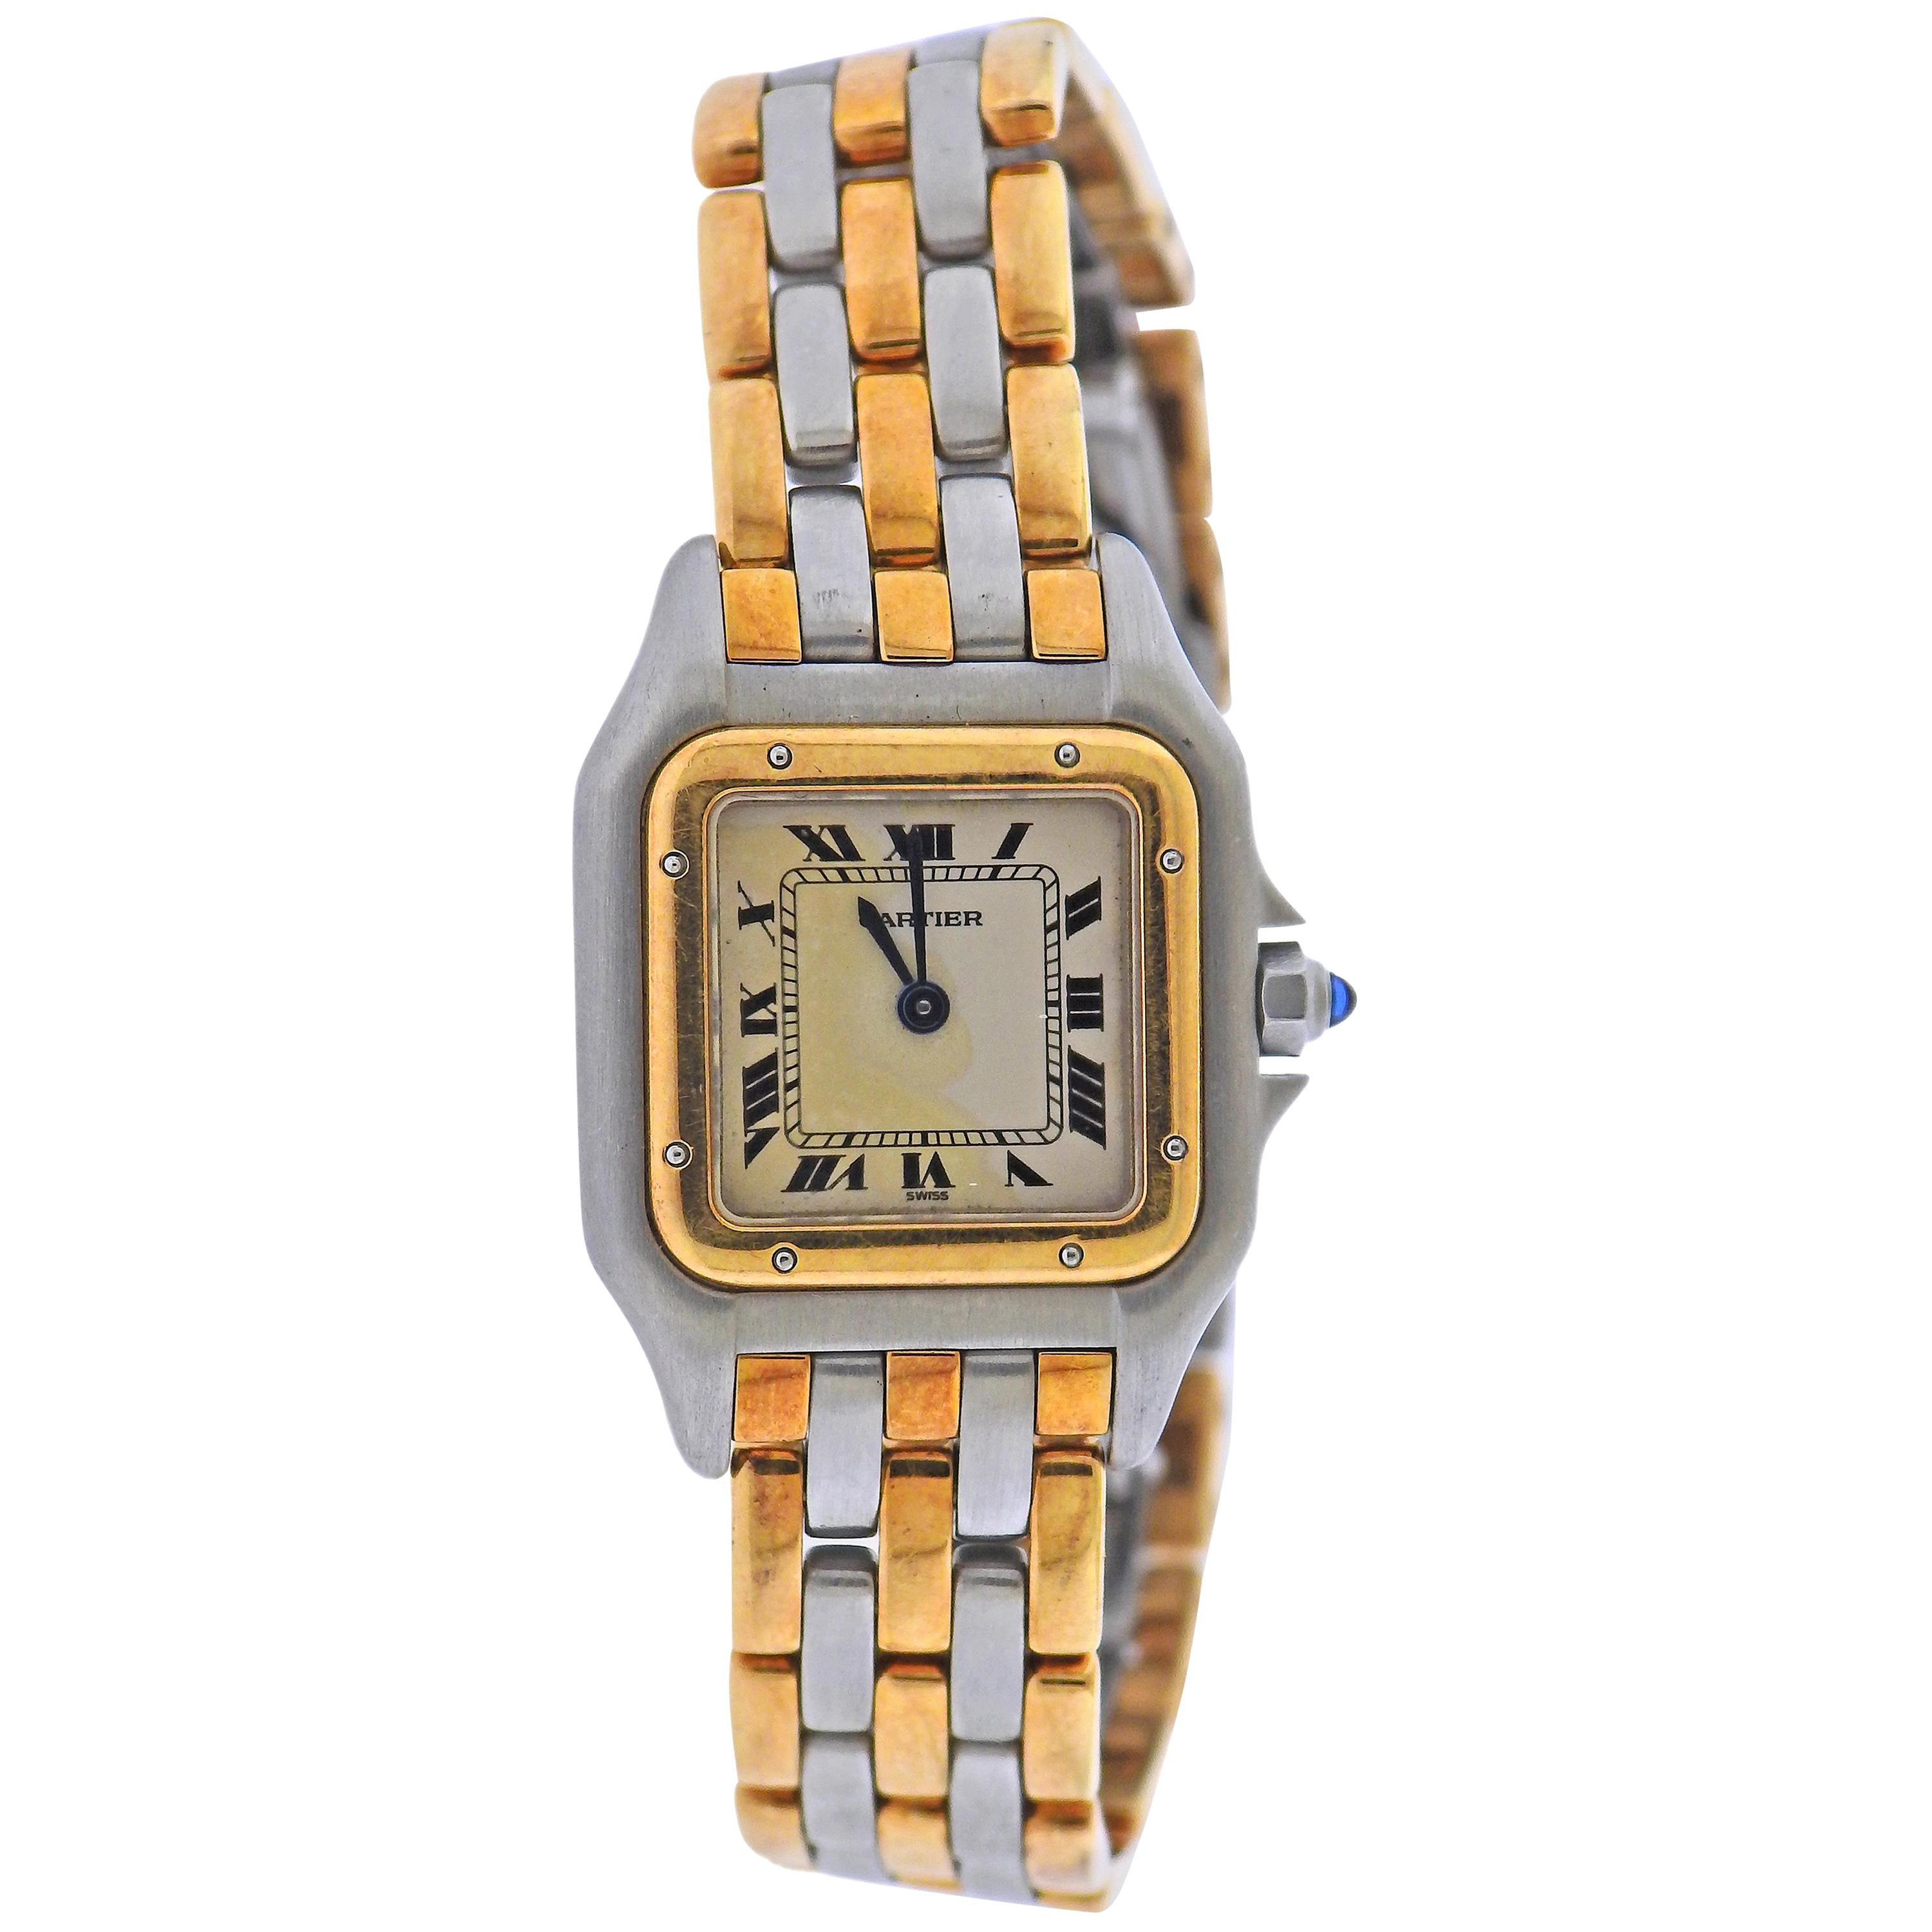 Cartier Panthere Gold Steel Two-Tone Ladies Watch